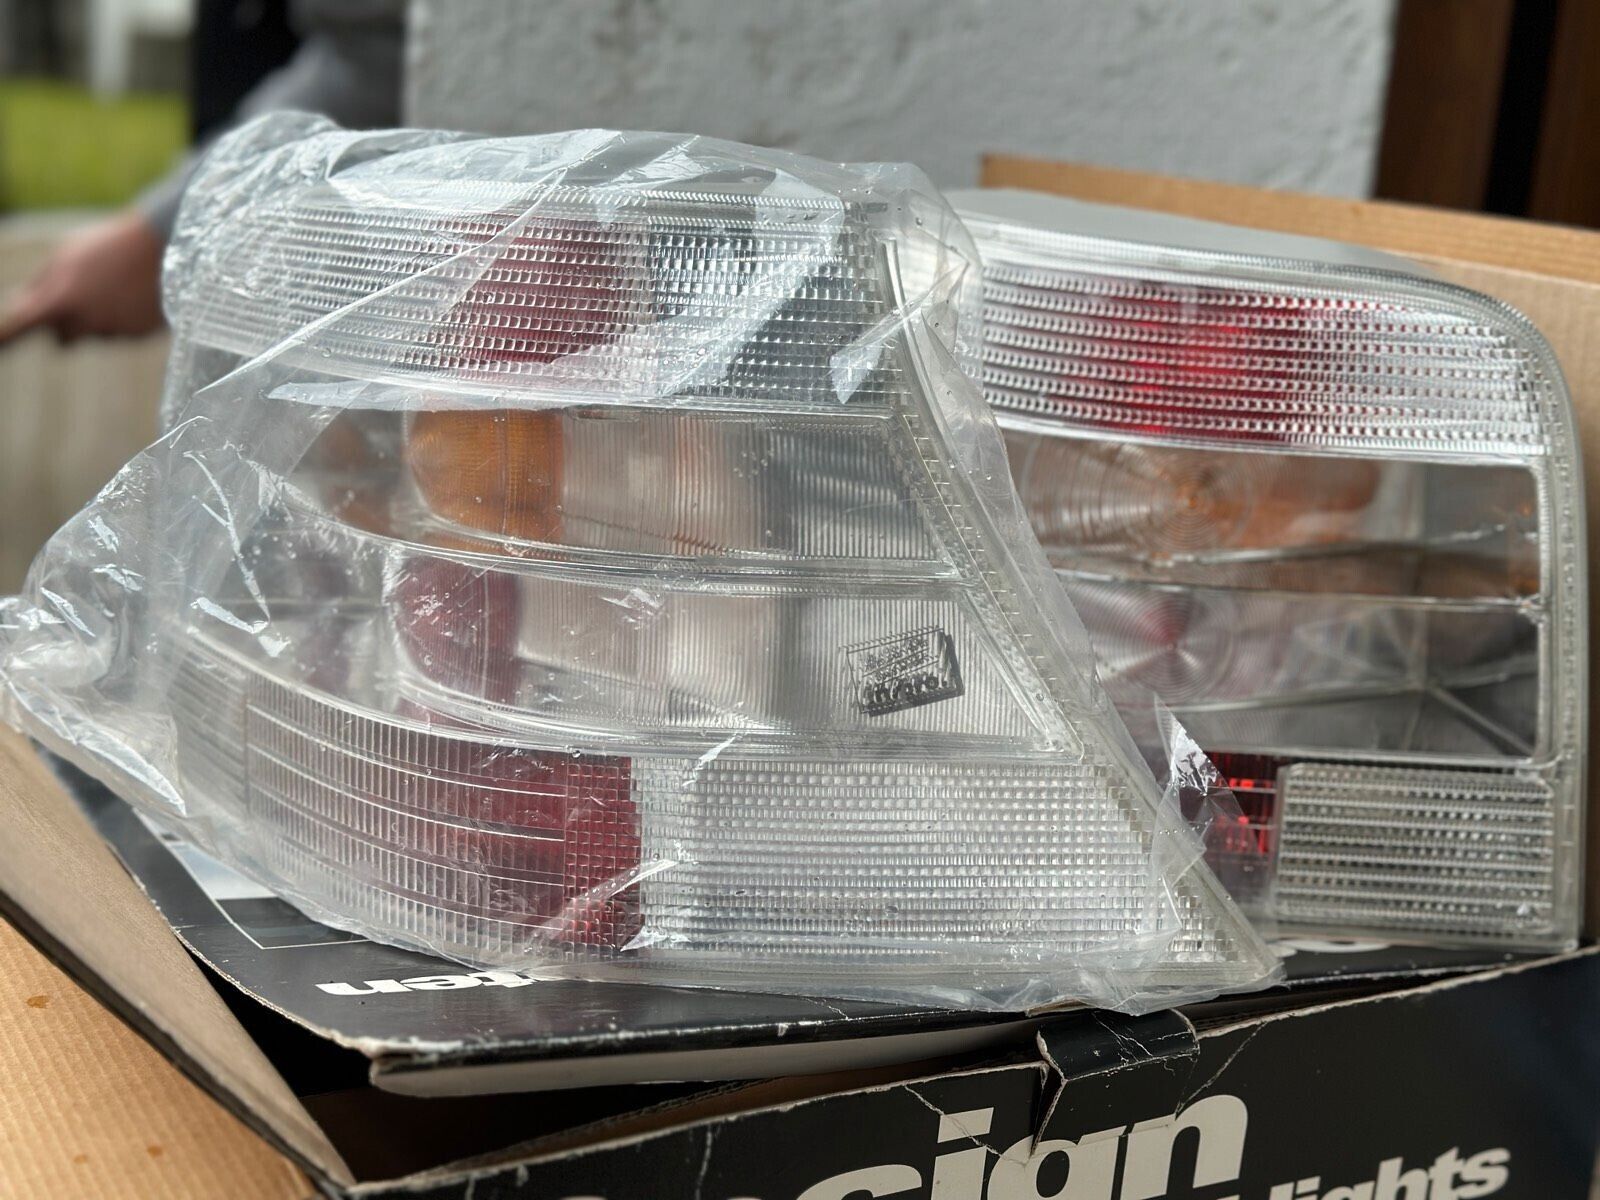 In Pro Clear White ALL Clear Taillights NEW NIB for MK4 IV Golf